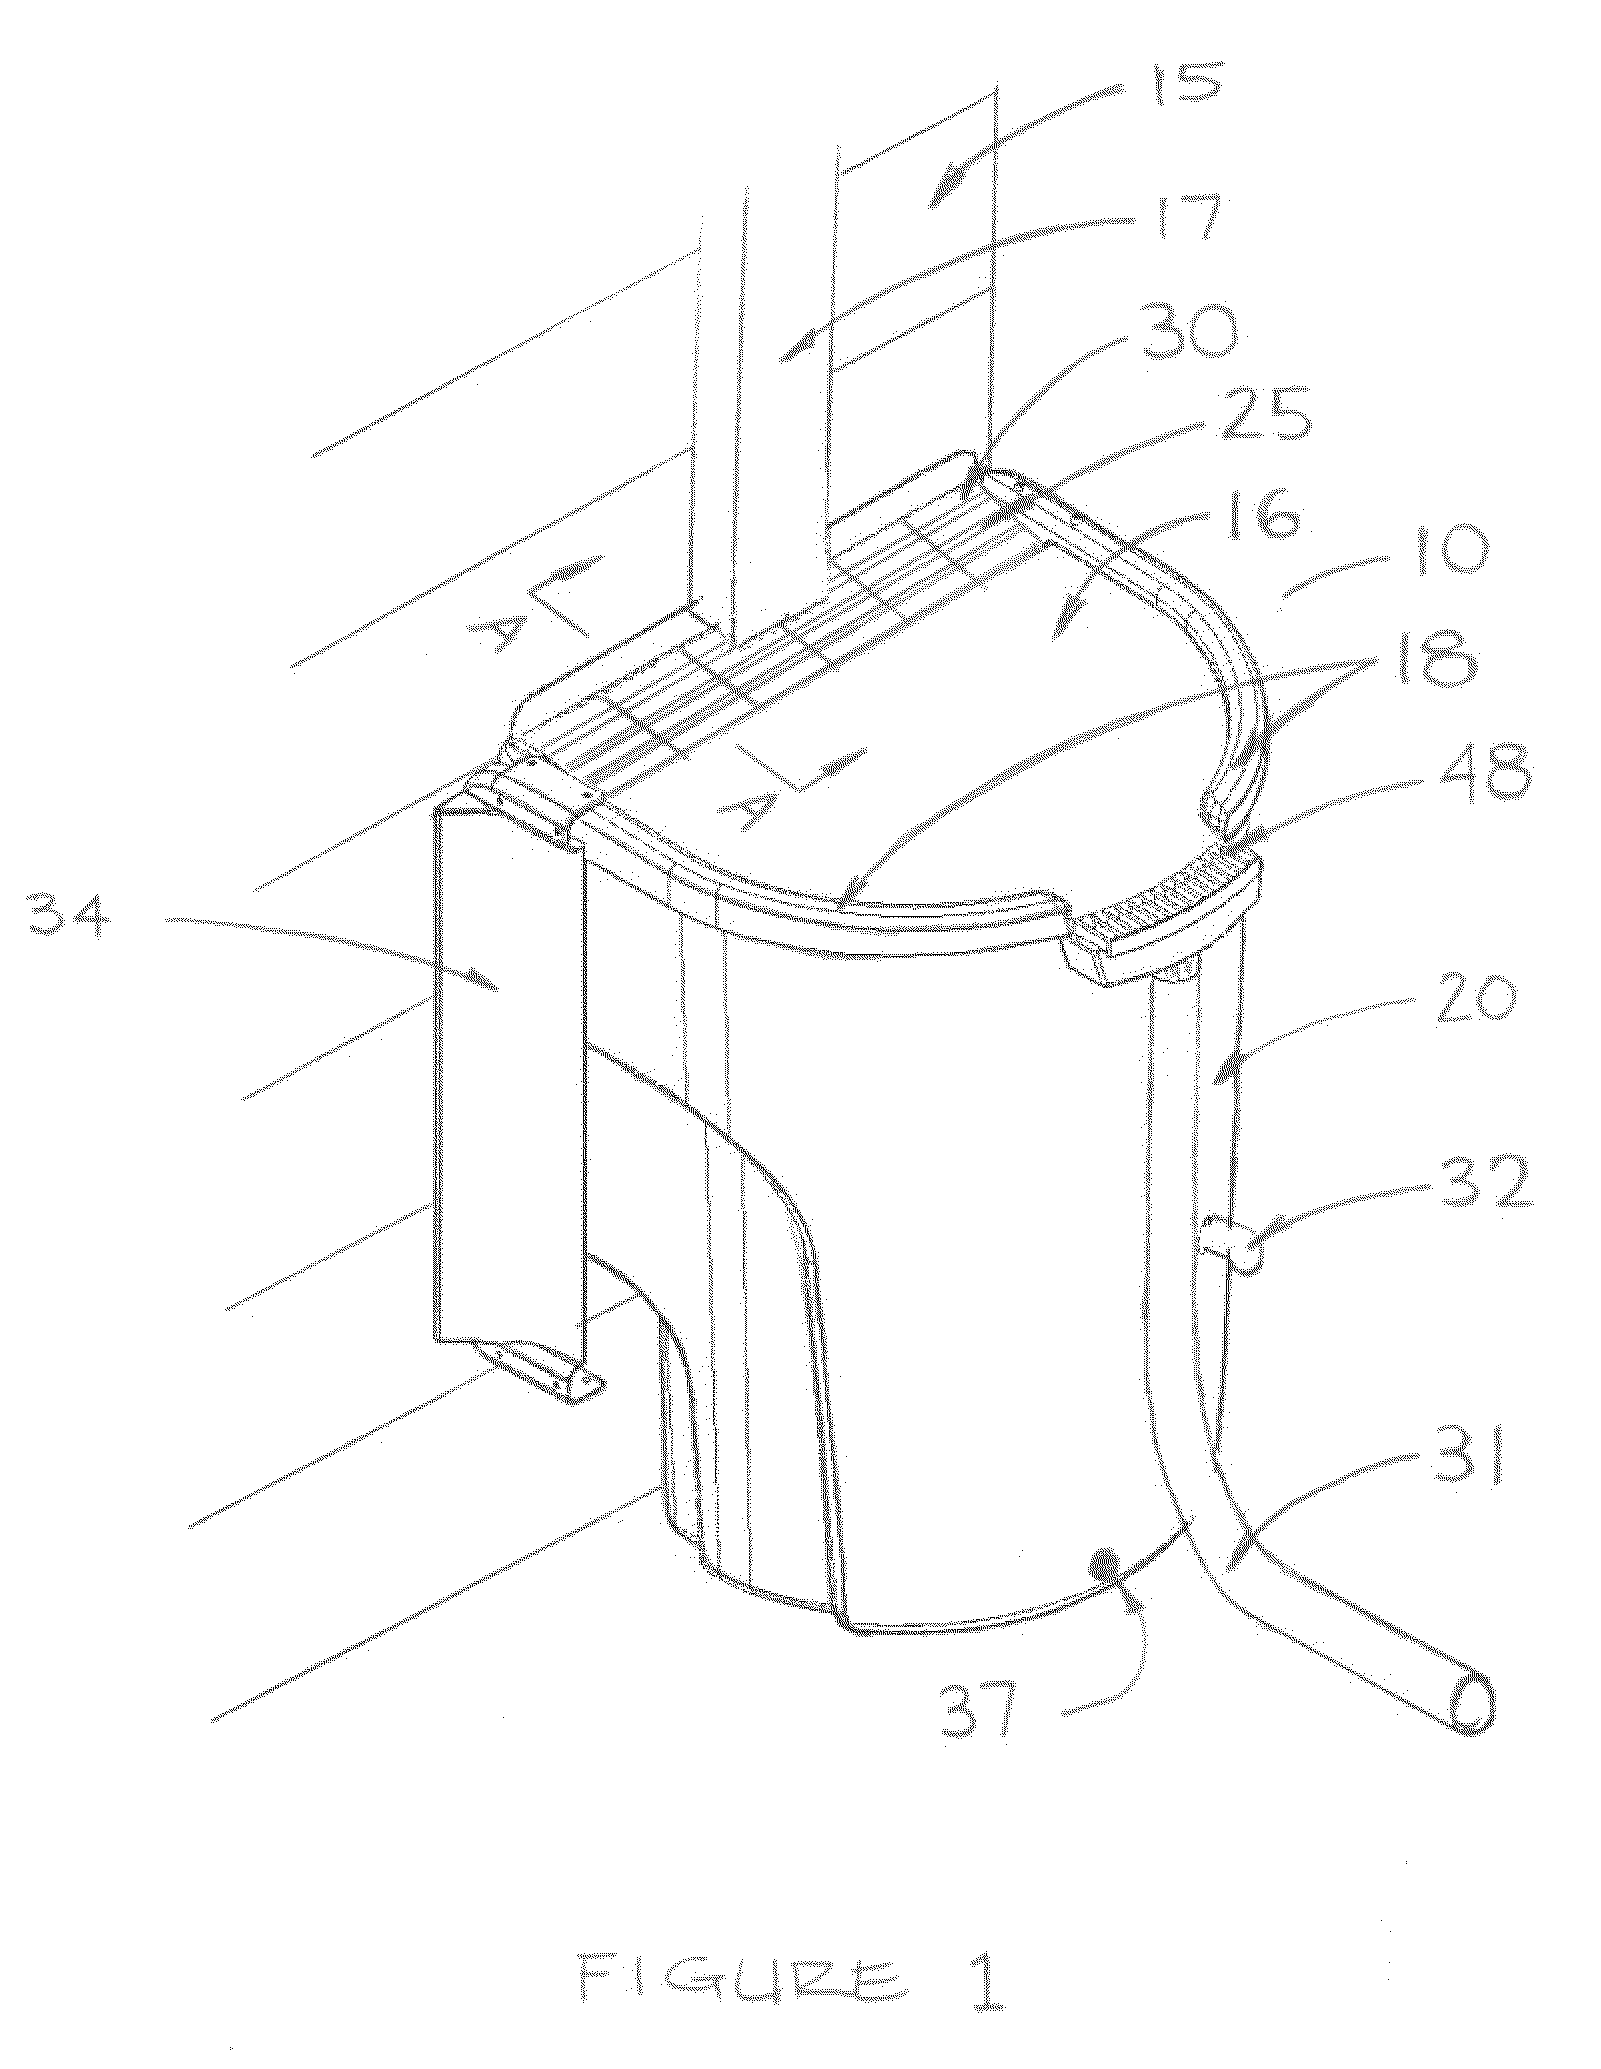 Water harvesting device